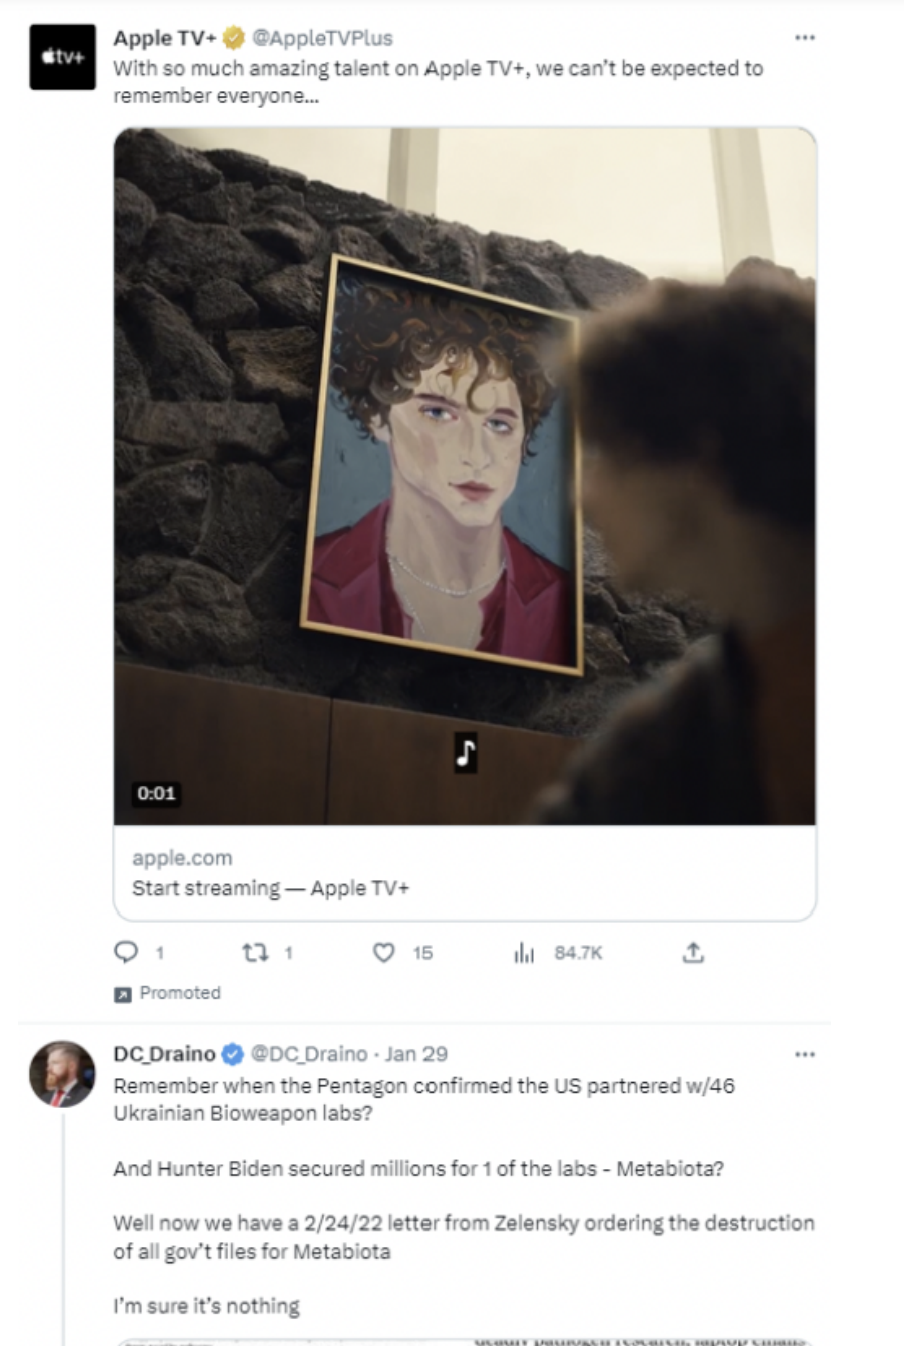 An Apple ad featuring actor Timothée Chalamet is displayed next to a tweet in which conspiracy theorist Rogan O’Handley promotes the debunked claim that Ukraine was developing biological weapons with the assistance of the U.S. government.